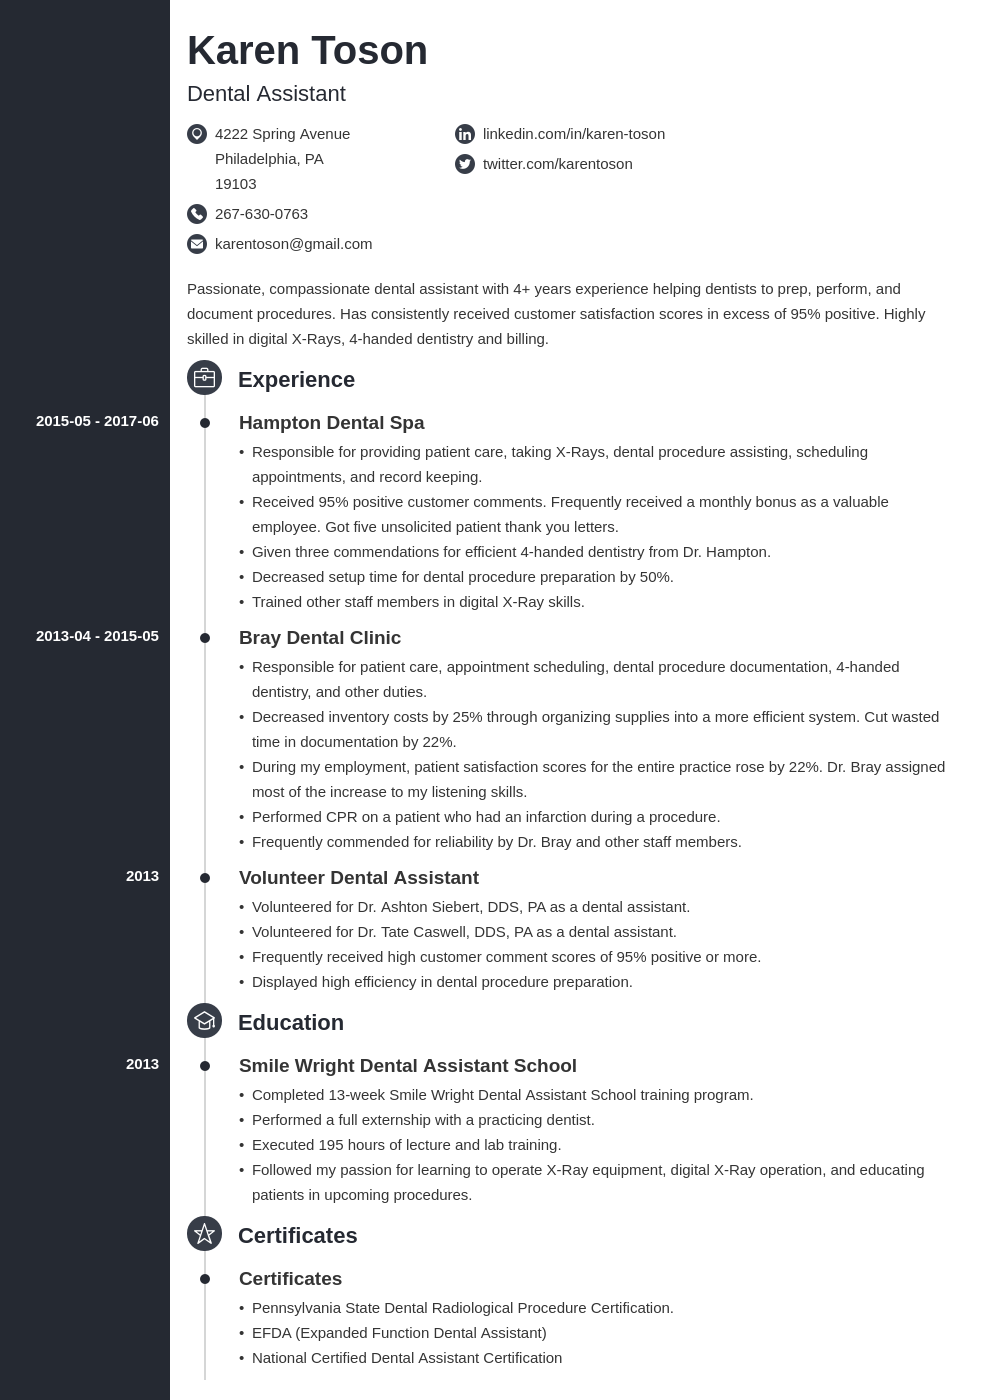 templates for pages resume